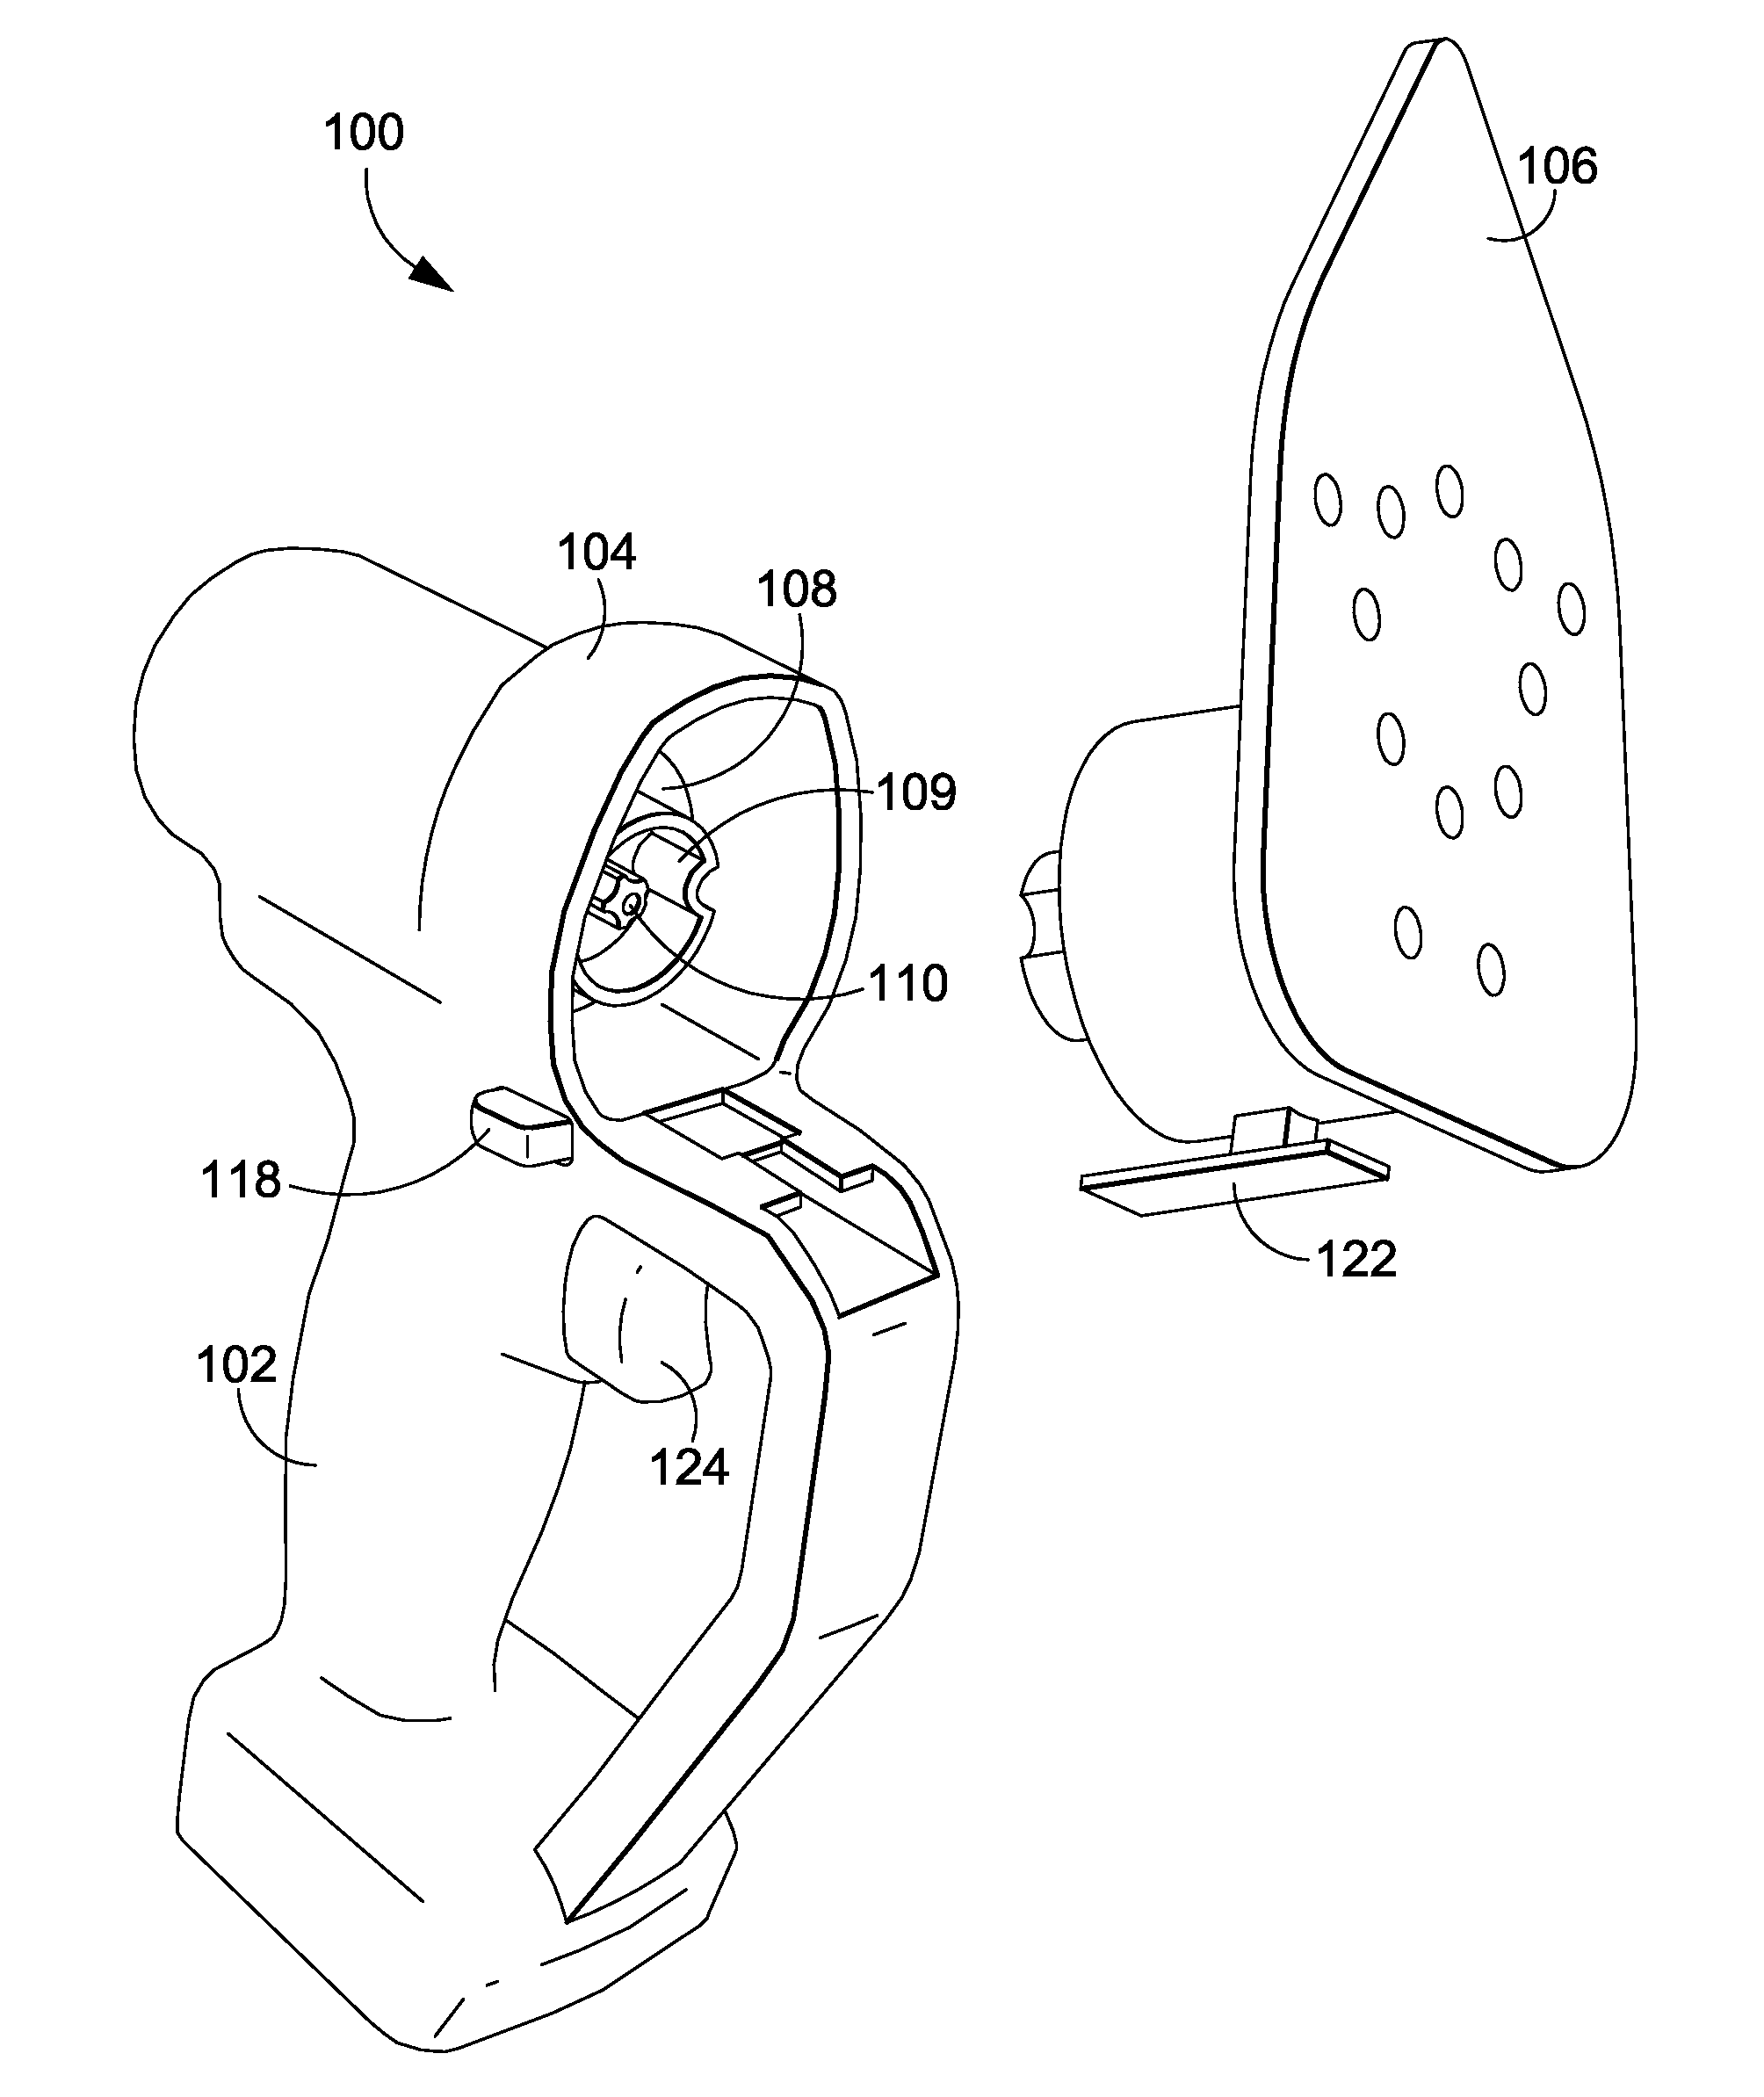 Multi-head power tool with reverse lock-out capability